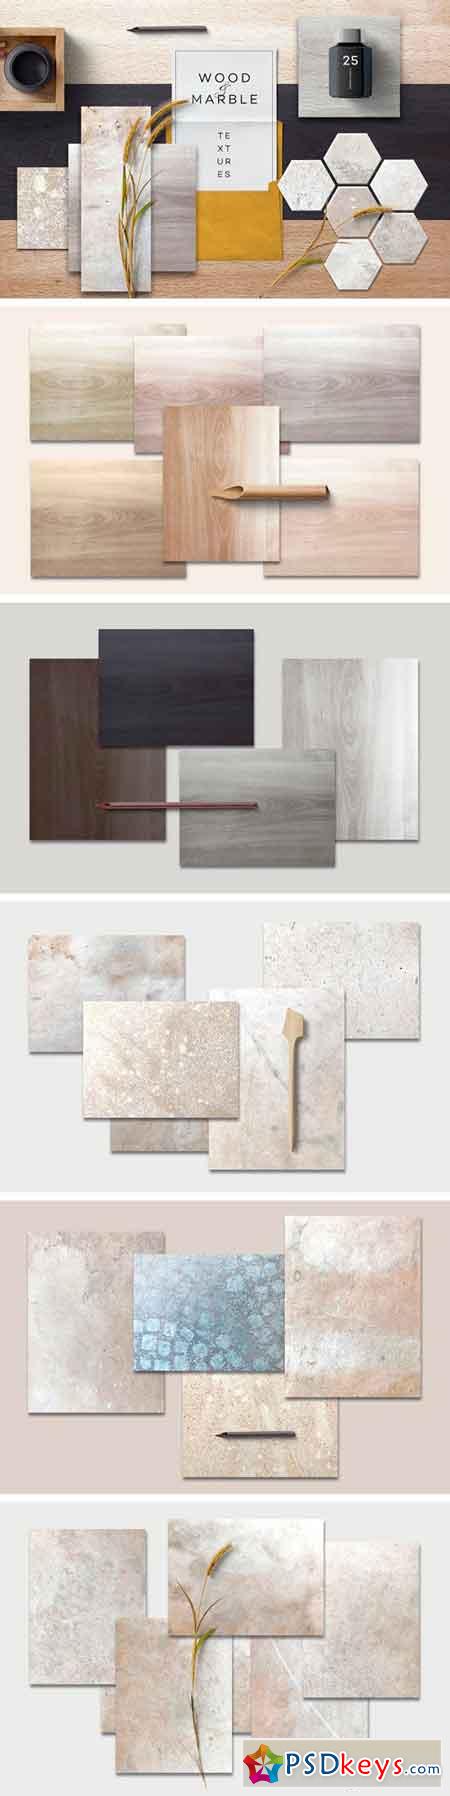 Wood & Marble Textures 1580339